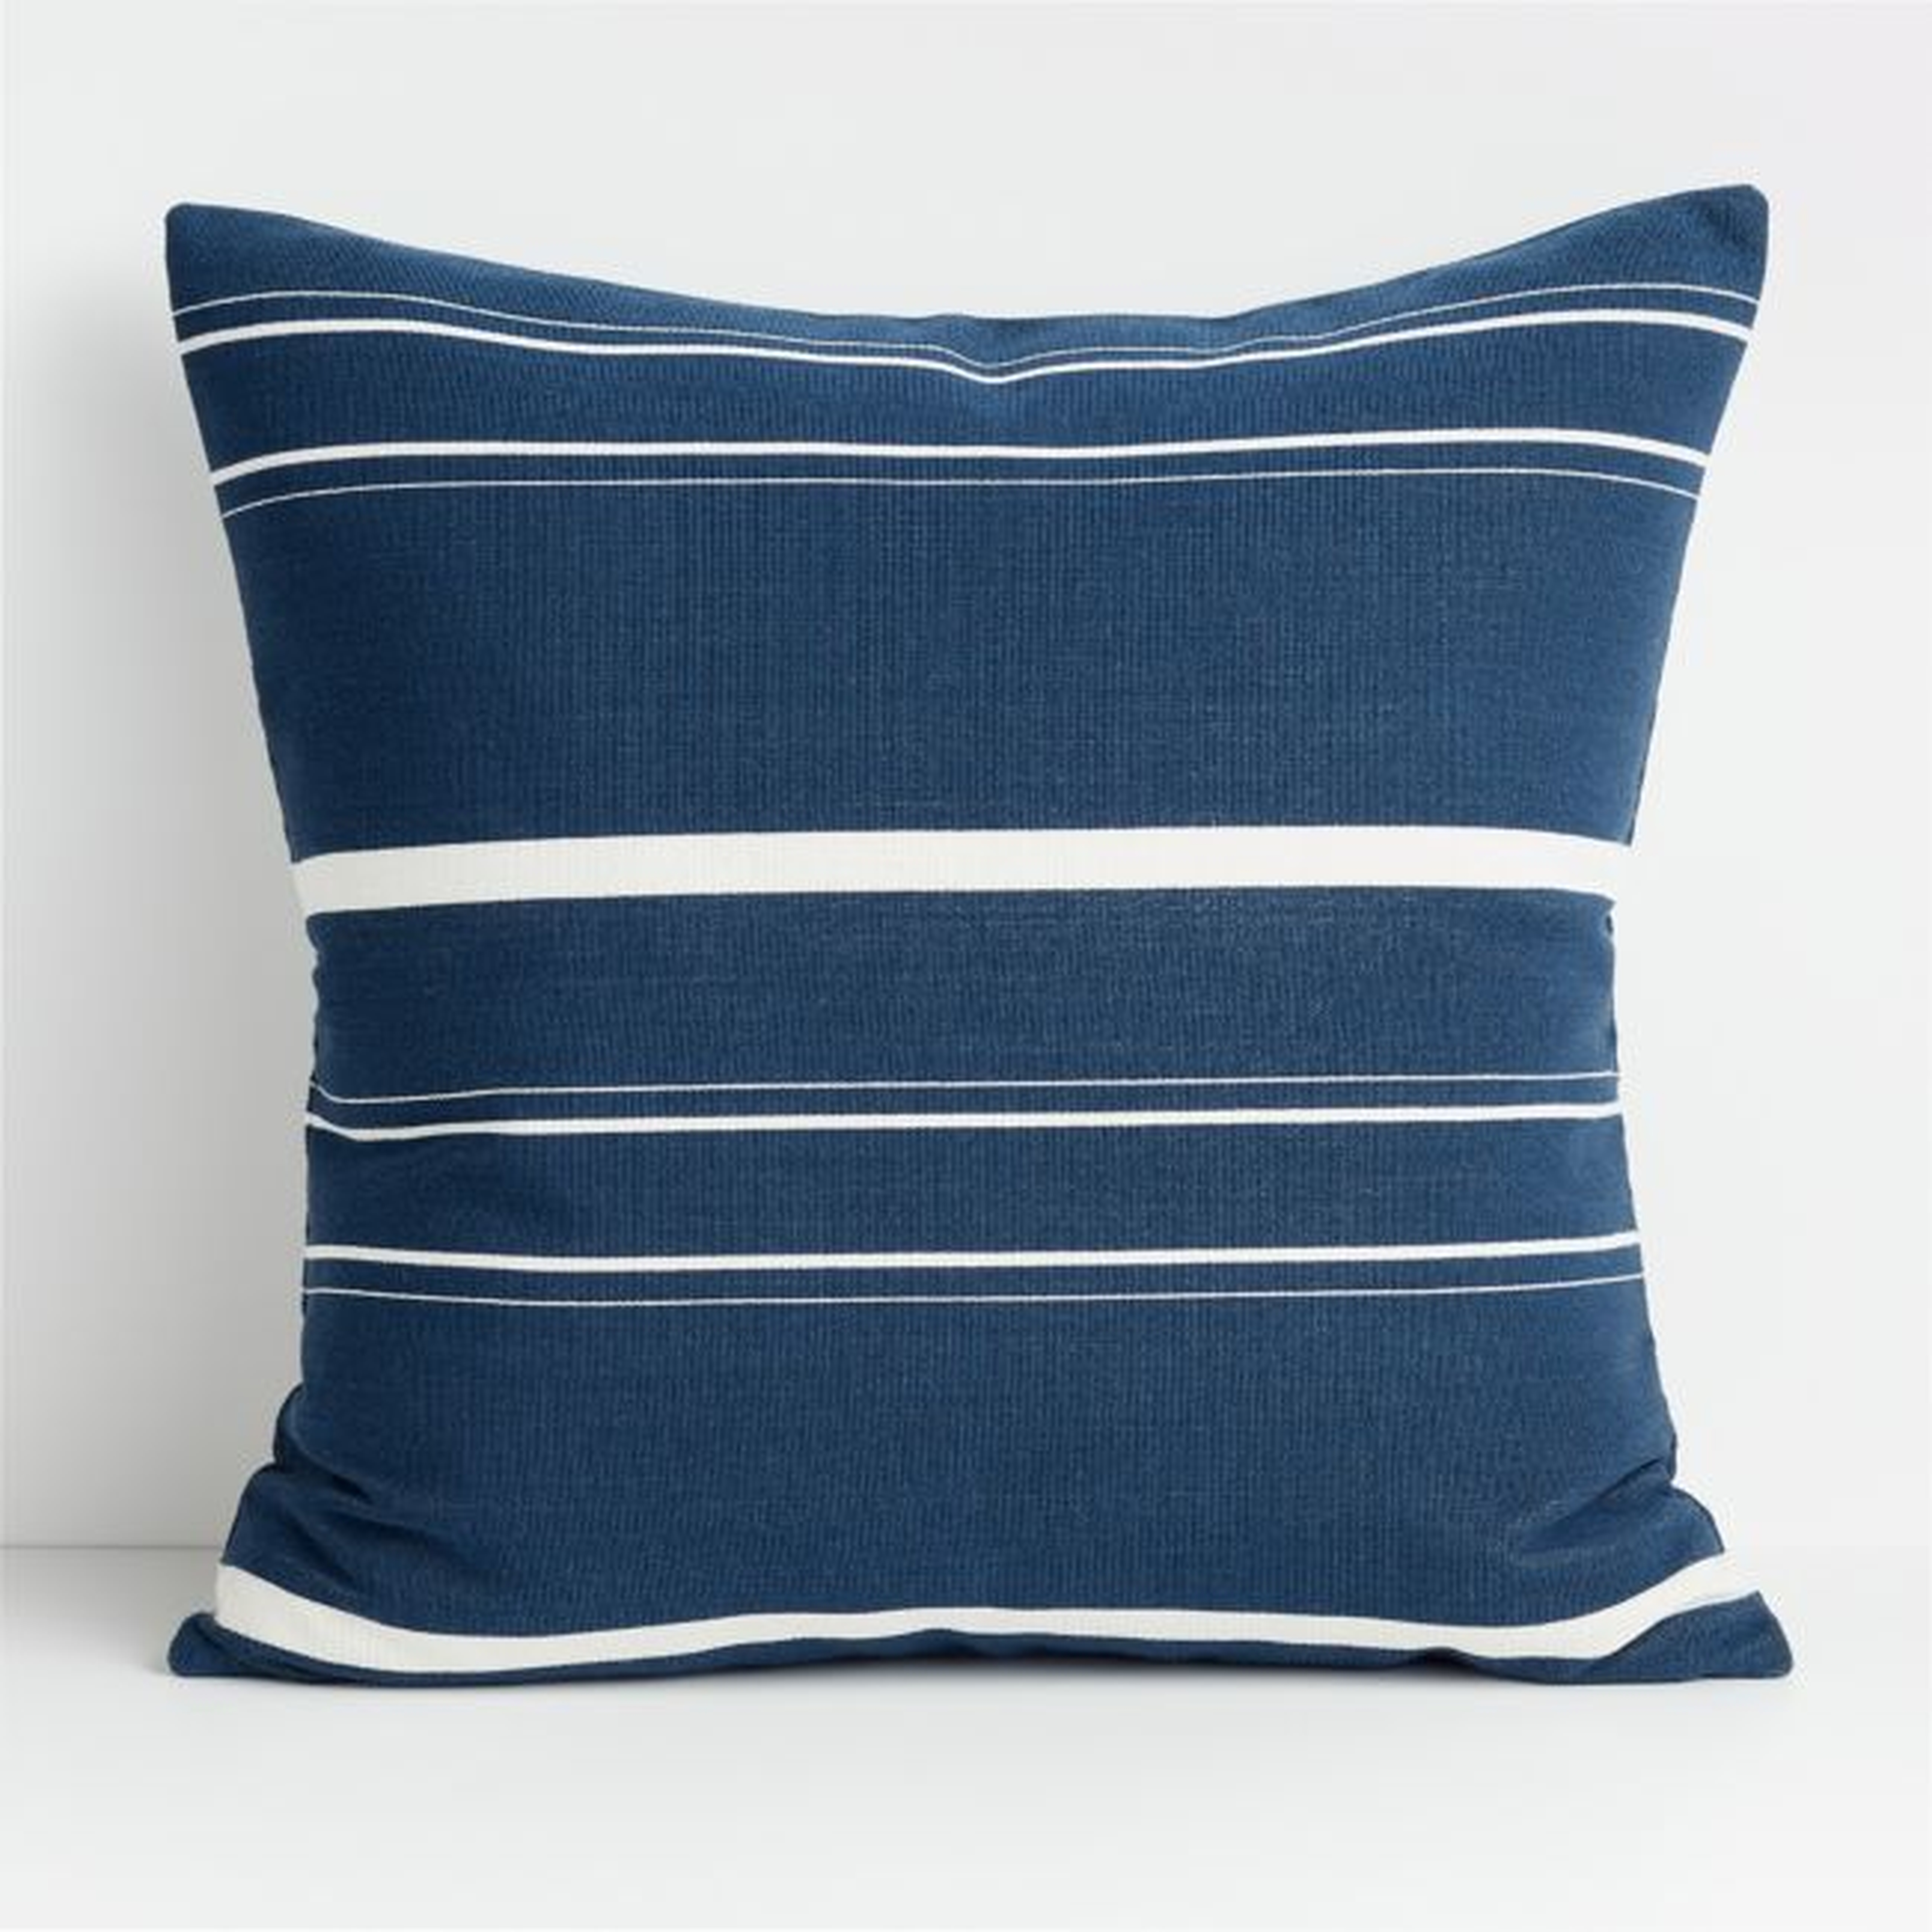 Lilane 23" Blue and White Pillow with Down-Alternative Insert - Crate and Barrel